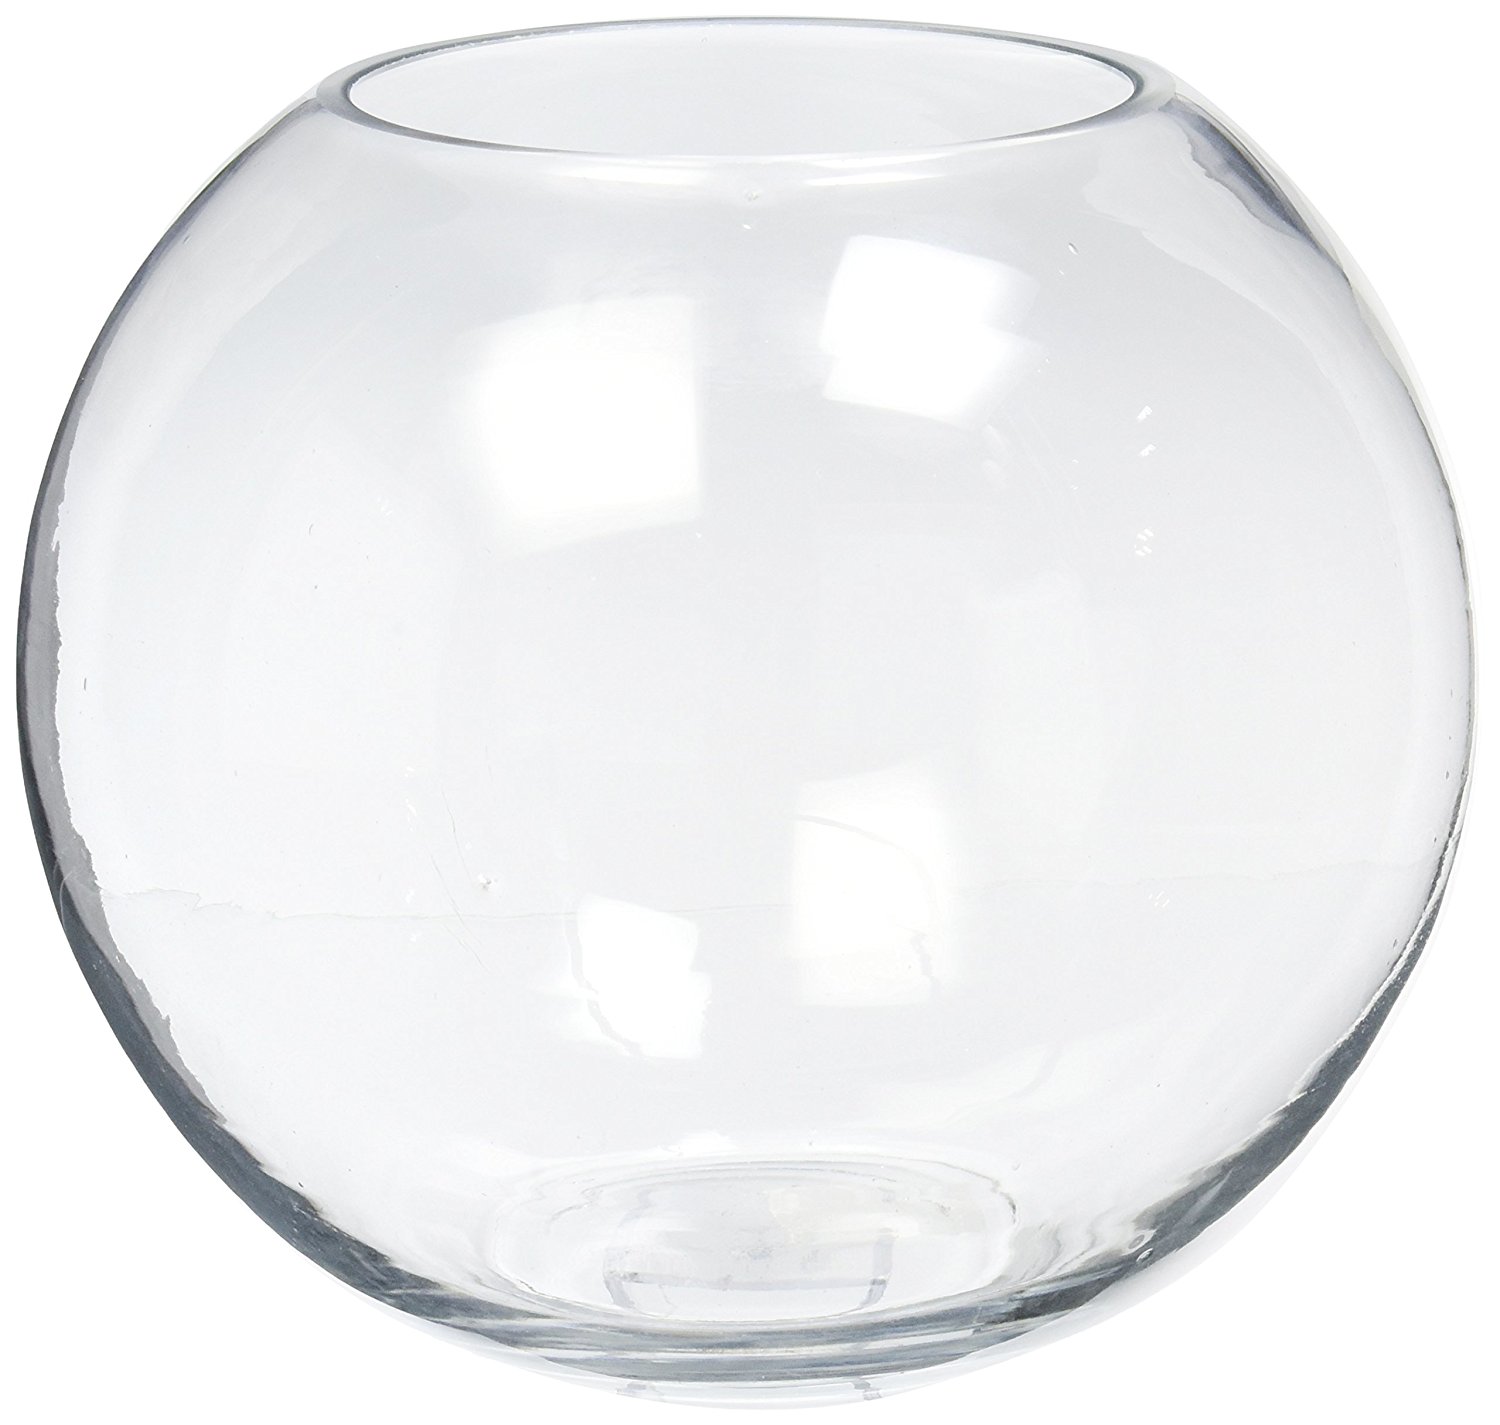 Amazon.com: WGV Clear Bubble Bowl Glass Vase with WGV Glass Cleaning ...